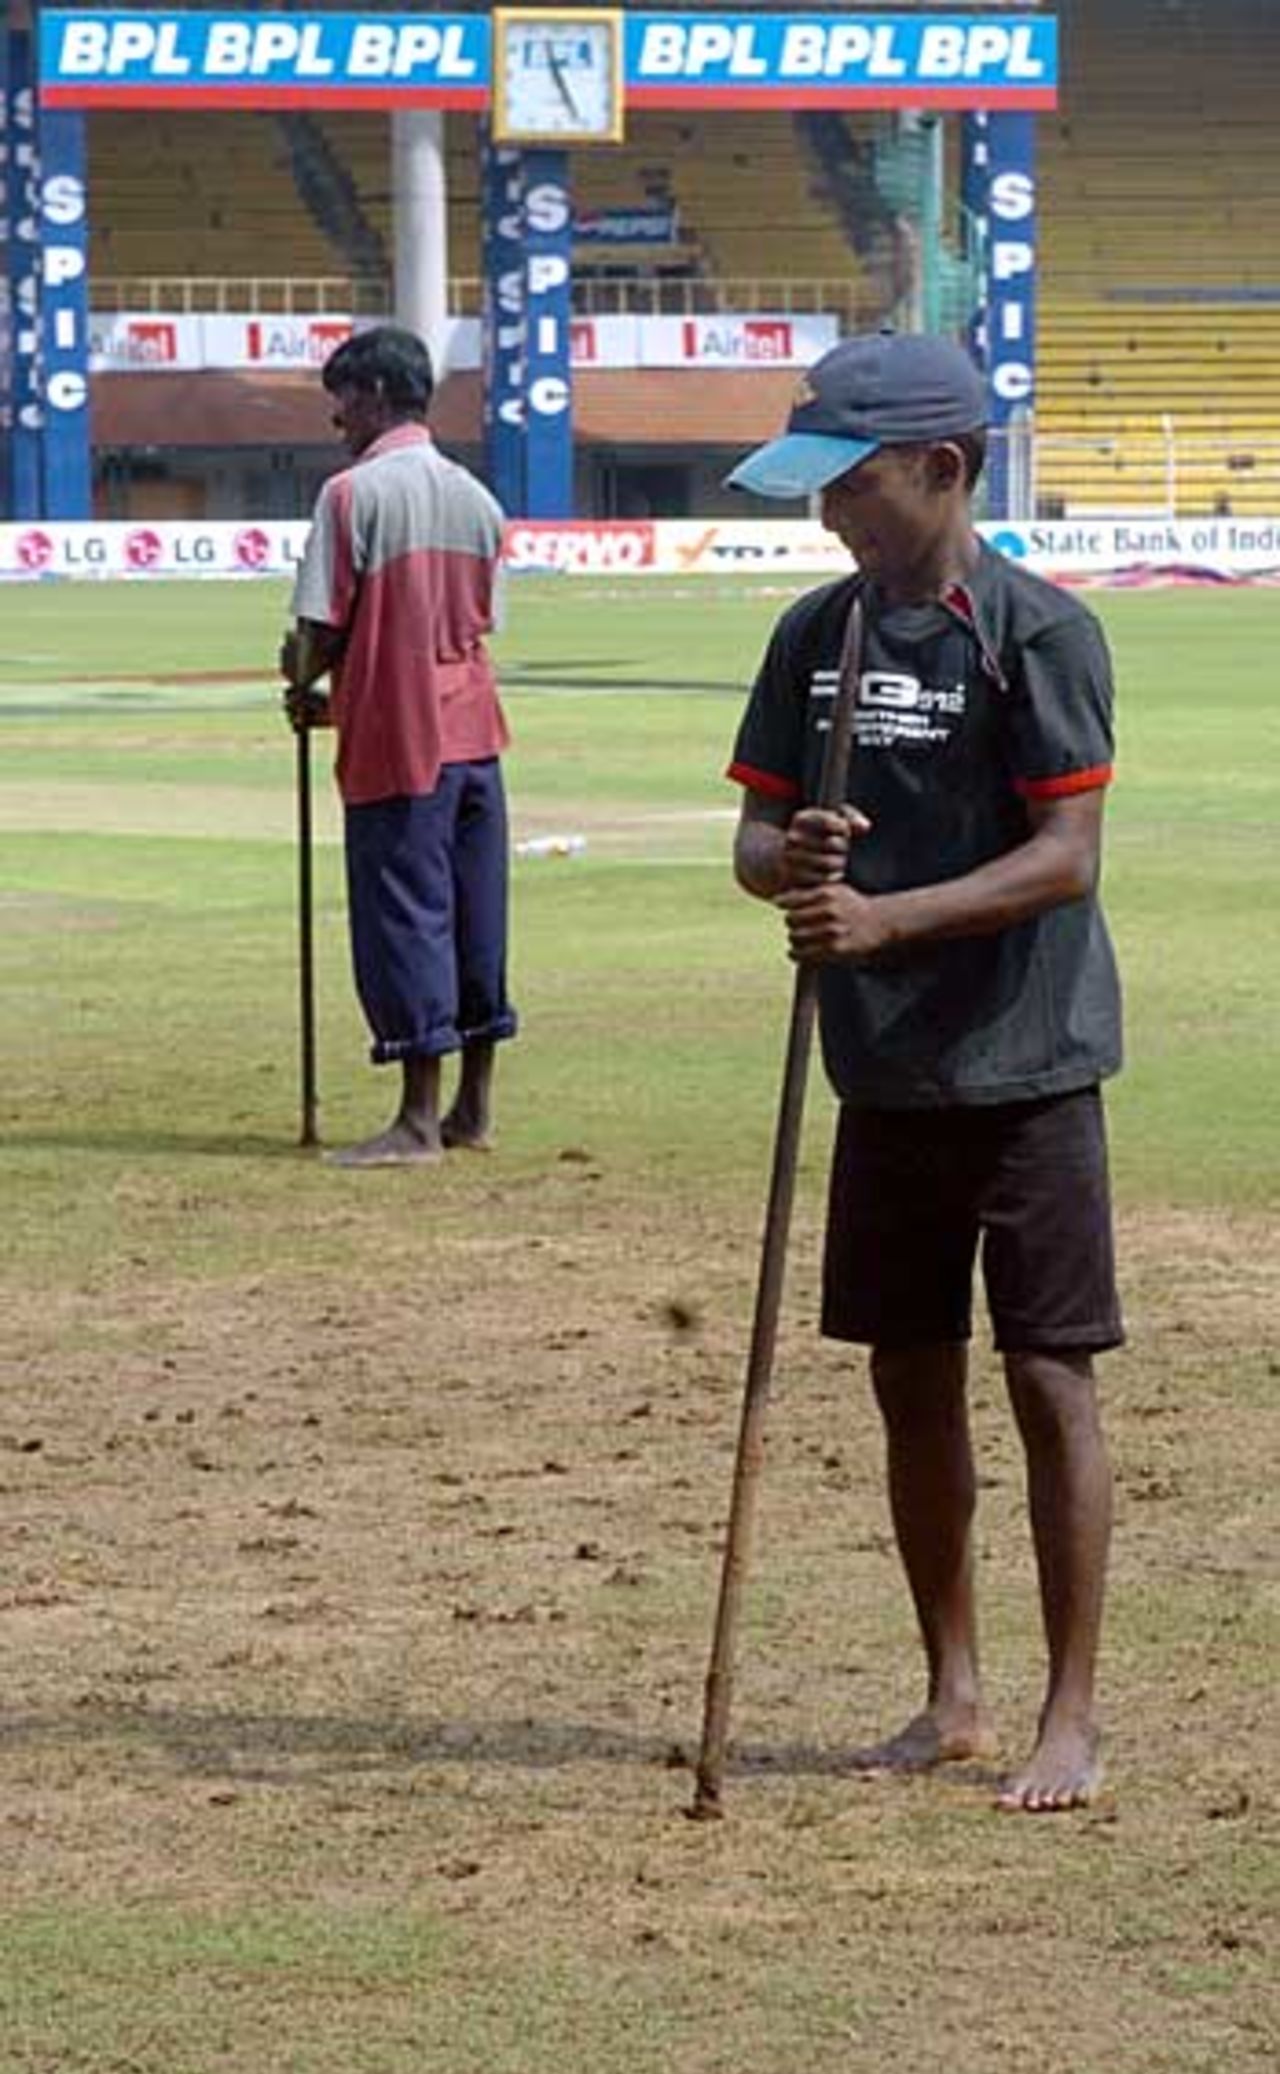 Groundsmen use shovels to drain the ground after another day was washed out, India v Sri Lanka, 1st Test, Chennai, December 4, 2005